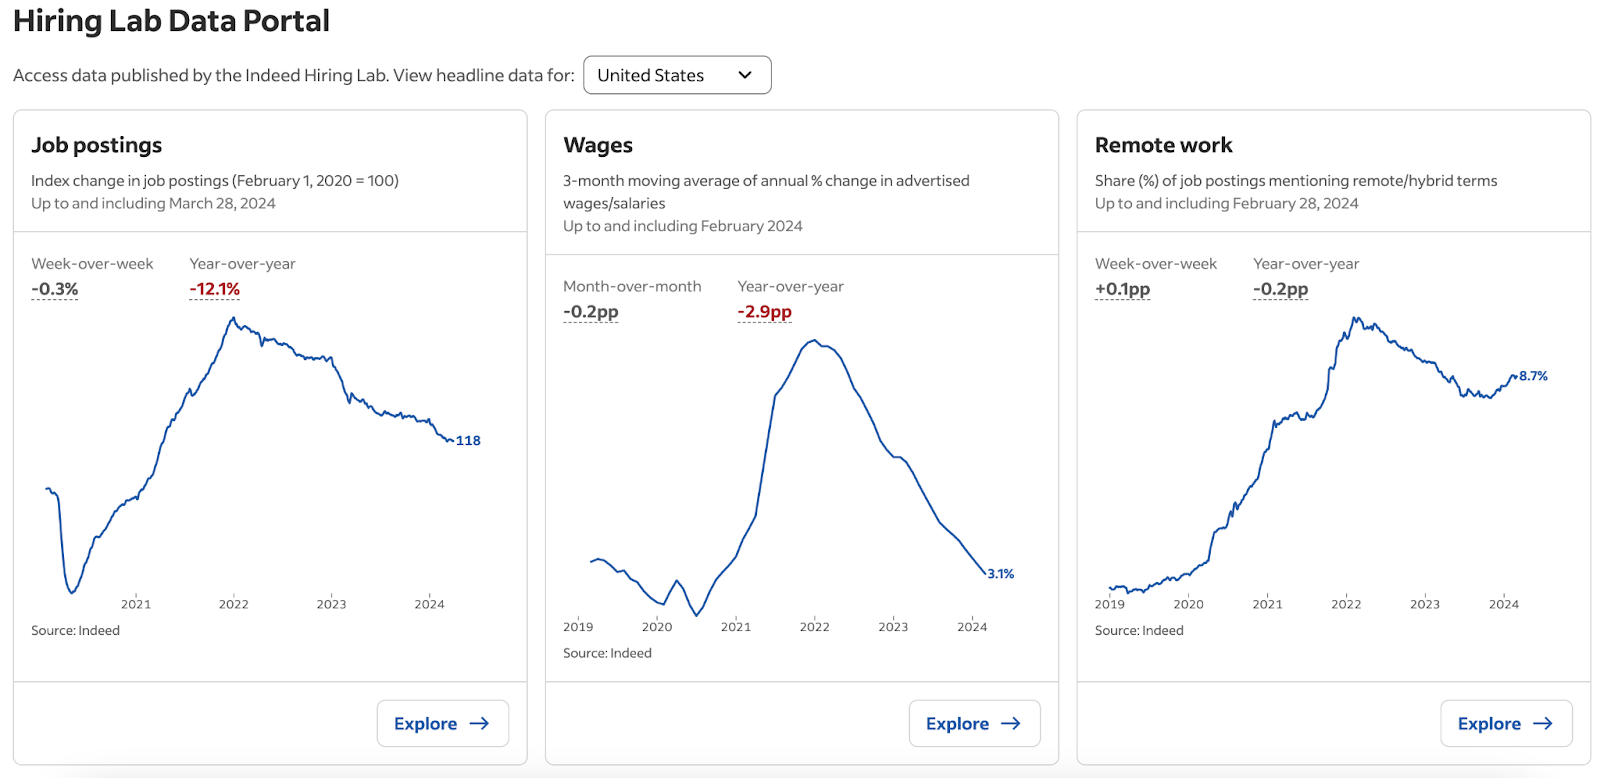 Three indices including the Job Postings Index, the Indeed Wage Tracker, and the Hybrid/Remote Tracker, all included in the new Hiring Lab Data Portal.